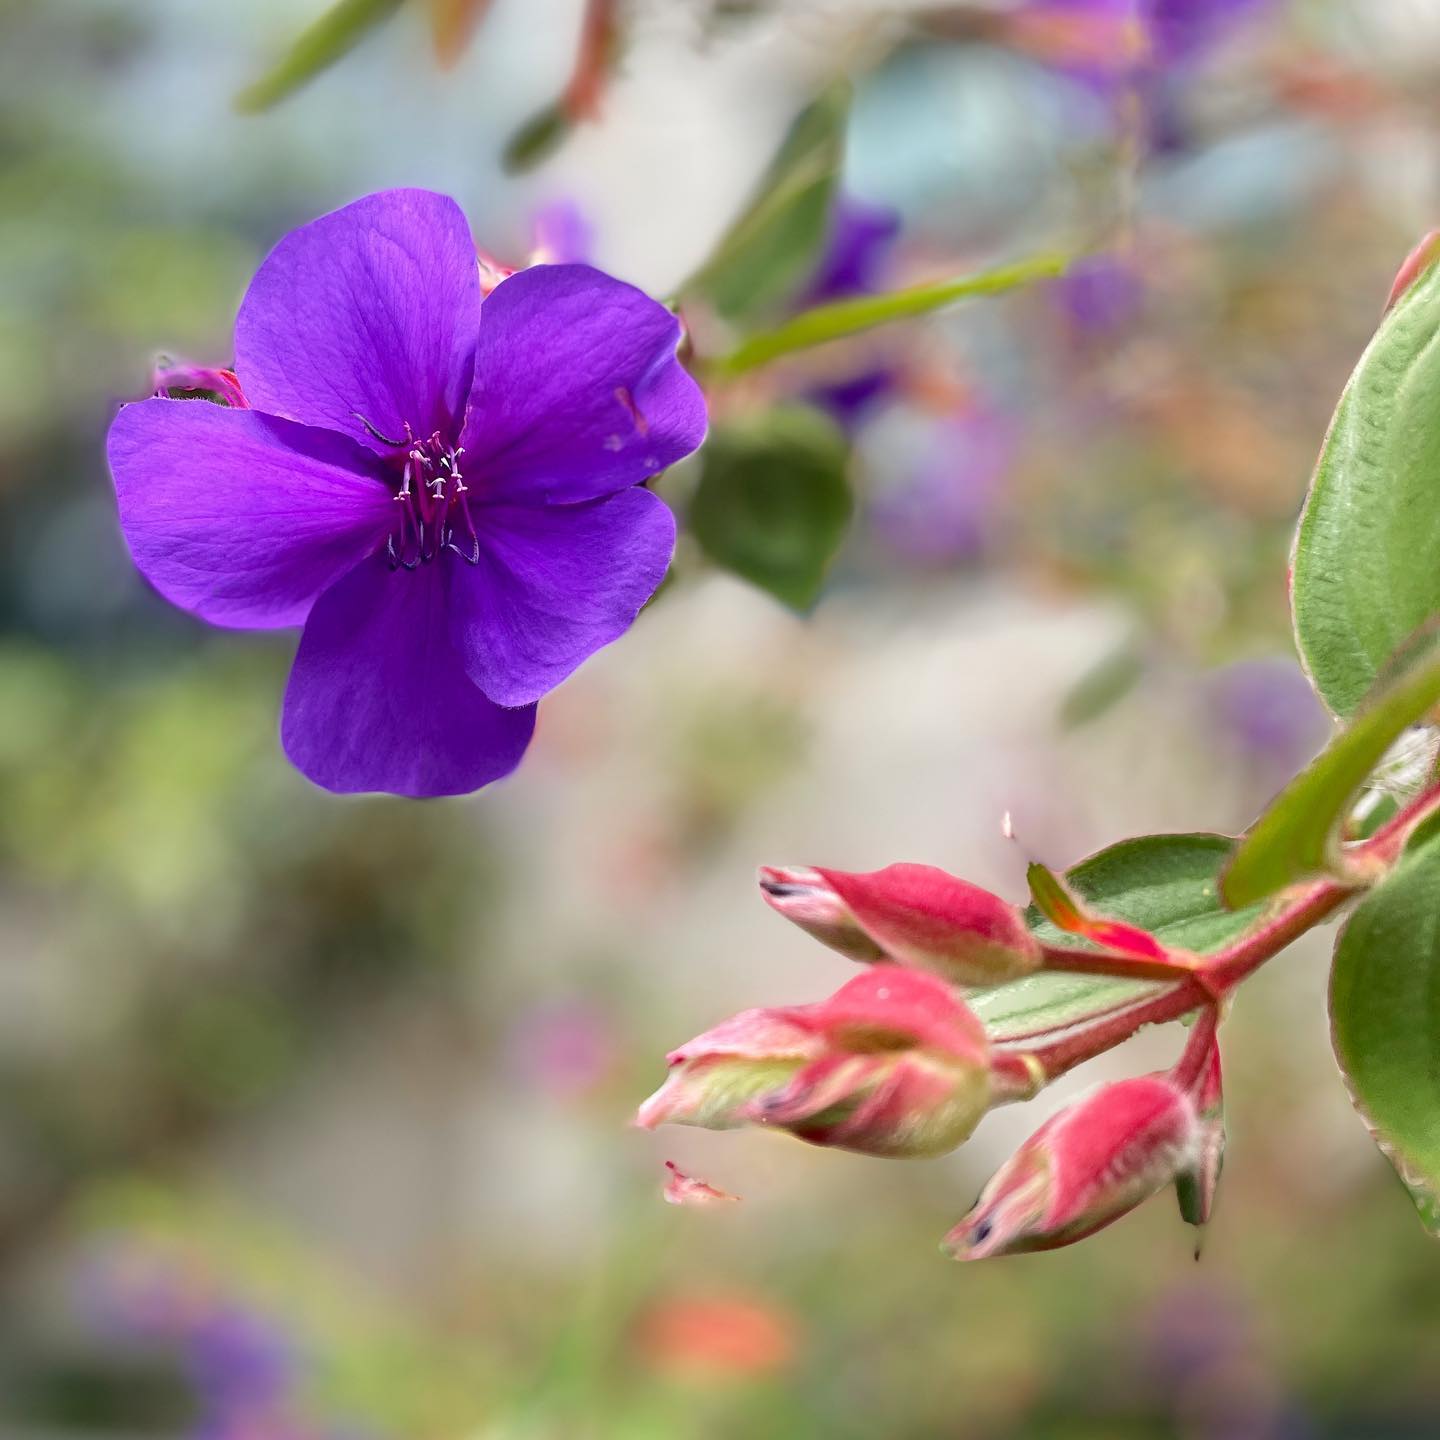 These tibouchina flowers are outside our building every year, adding a burst of color amidst the urban gray